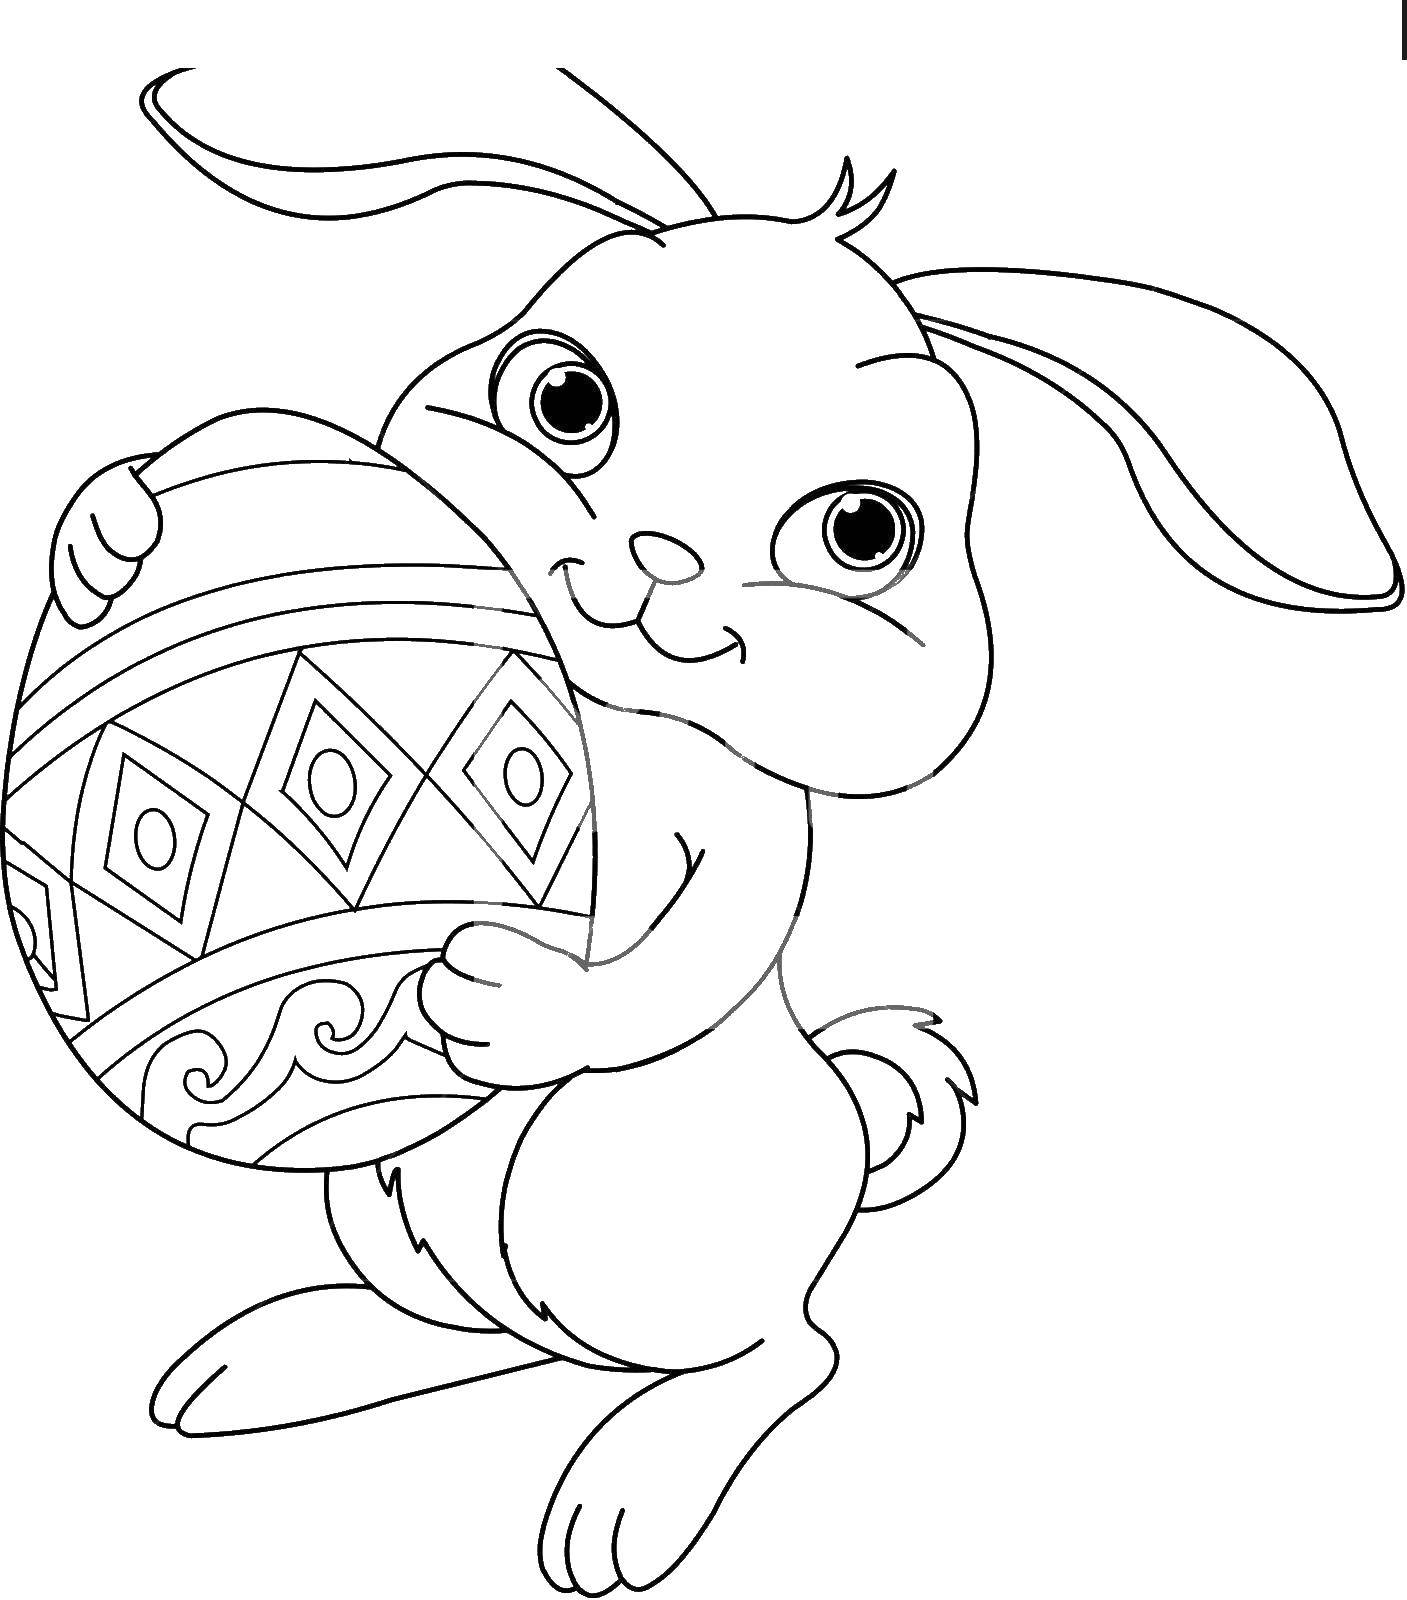 Coloring Easter Bunny with egg. Category coloring Easter. Tags:  Easter, eggs, rabbit.